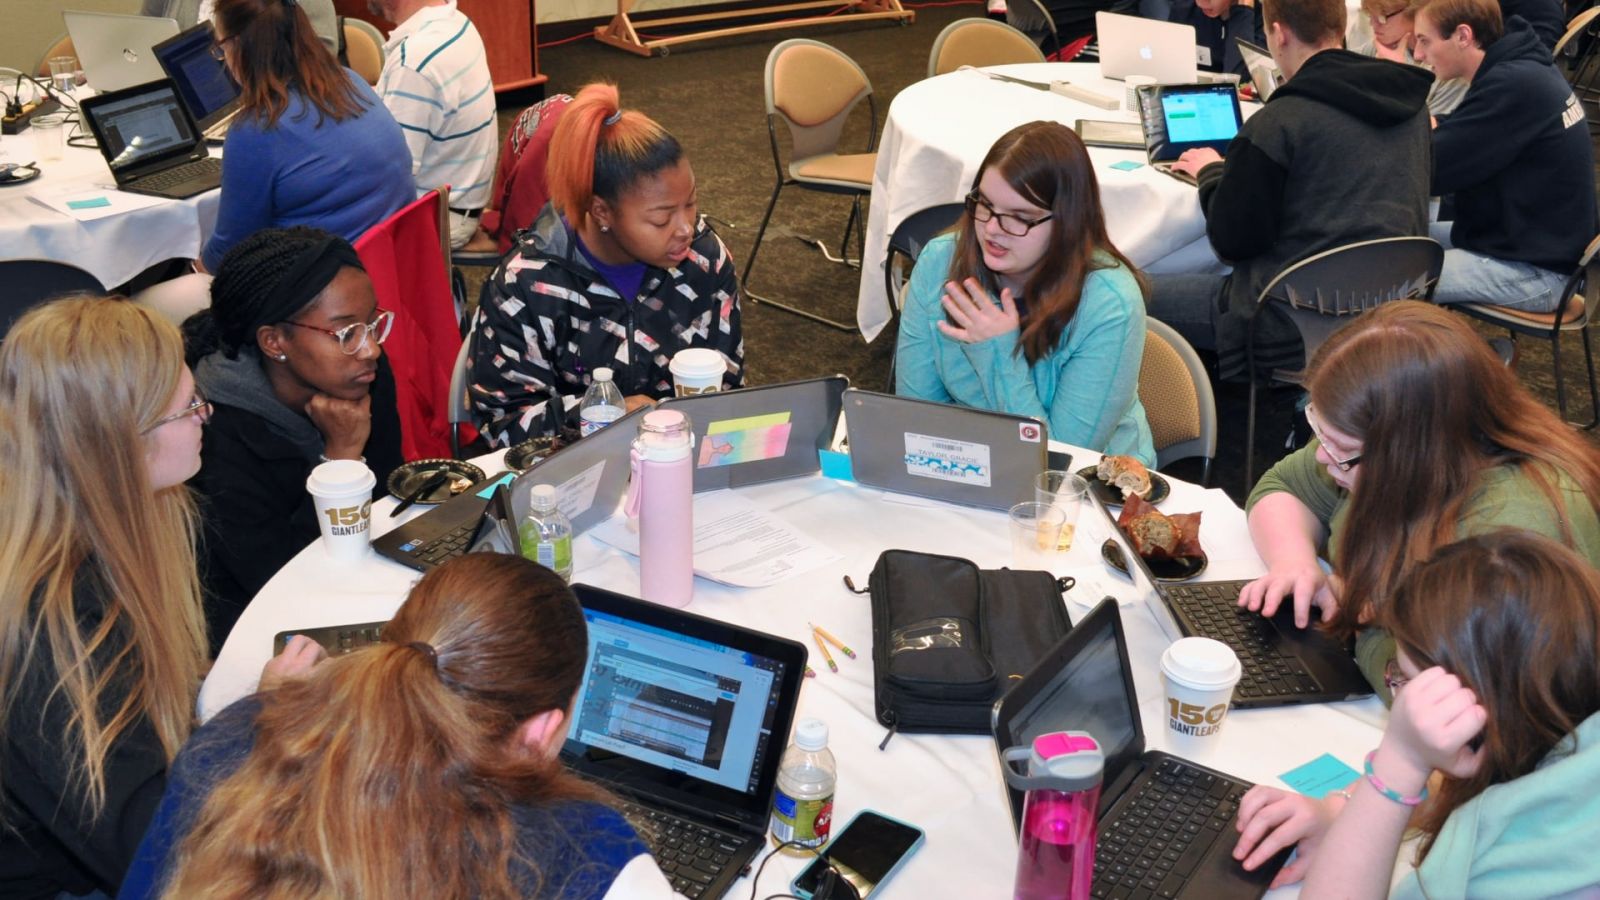 Students work on challenges at the Cyber Encounters workshop